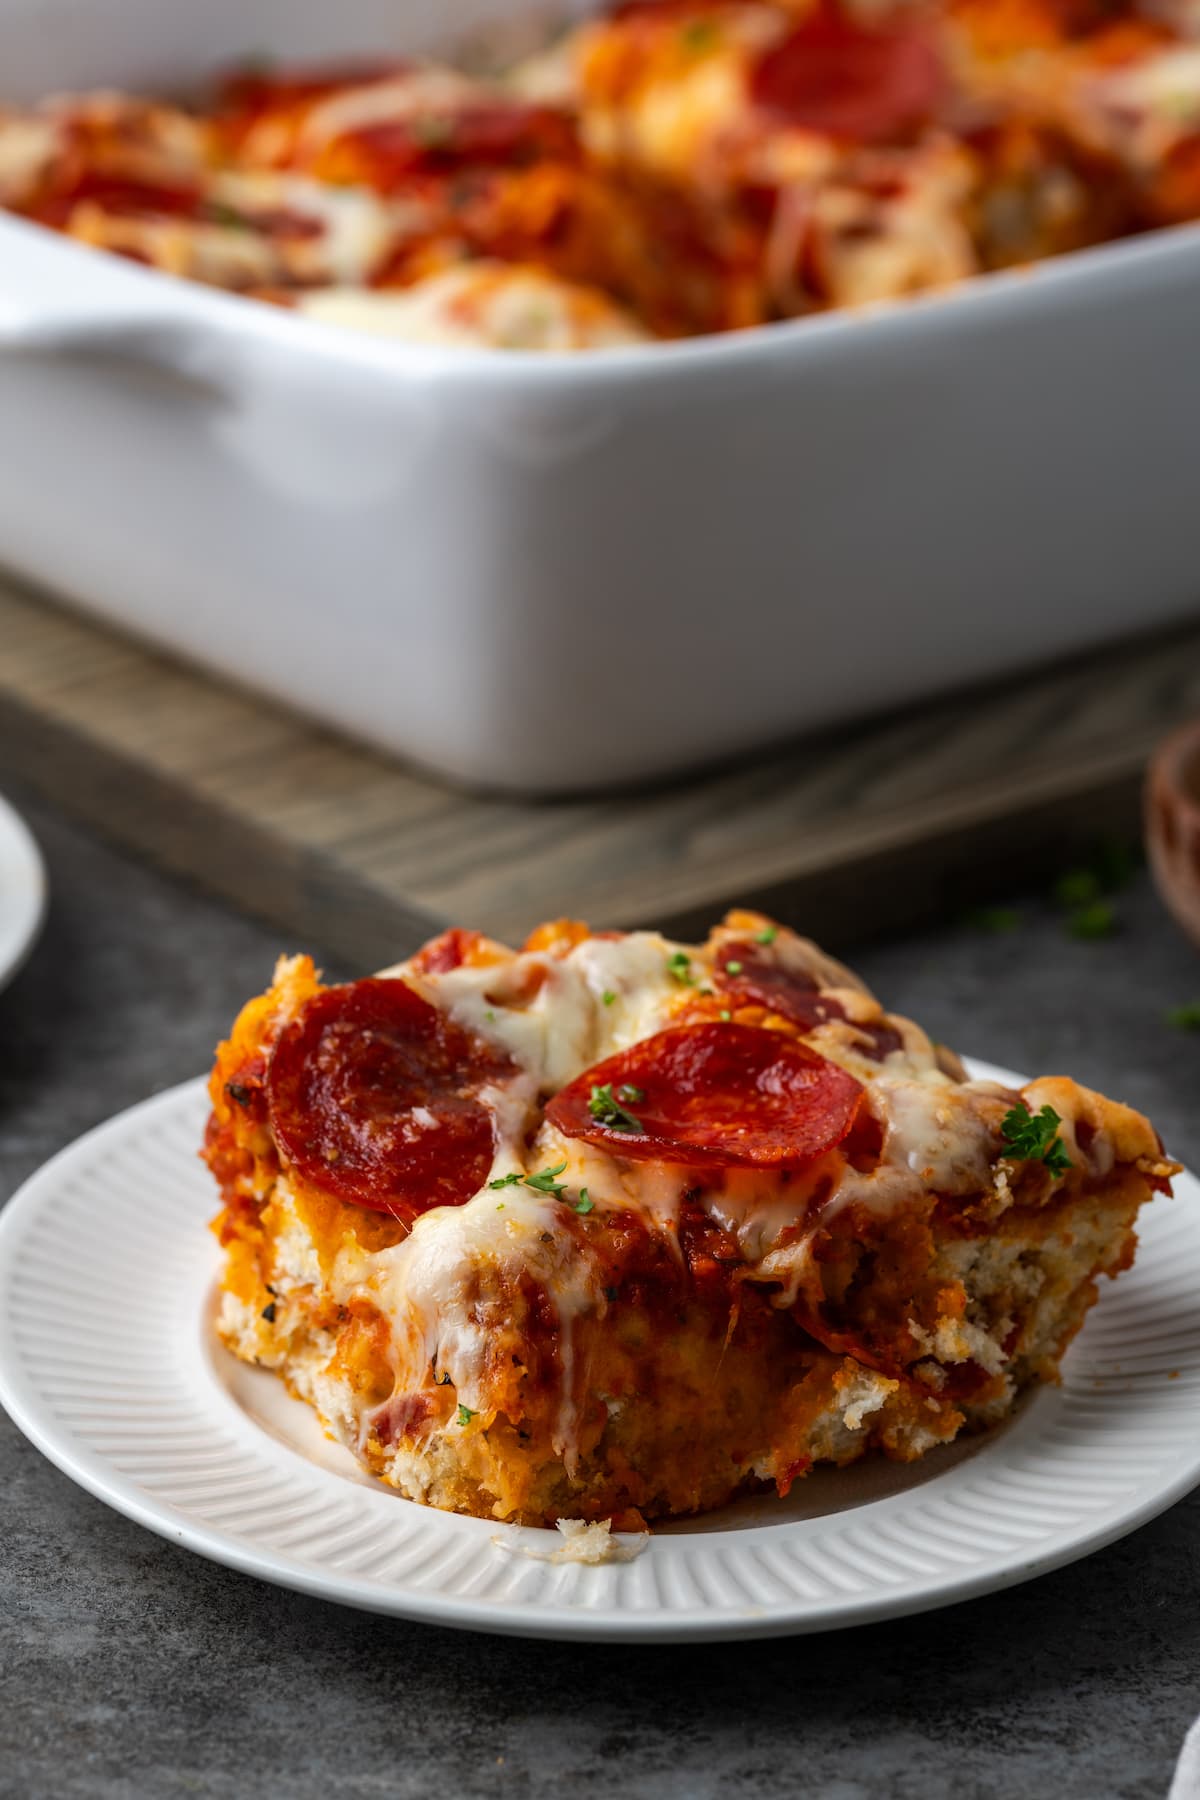 A serving of pizza casserole on a white plate, with the rest of the casserole in a baking dish in the background.